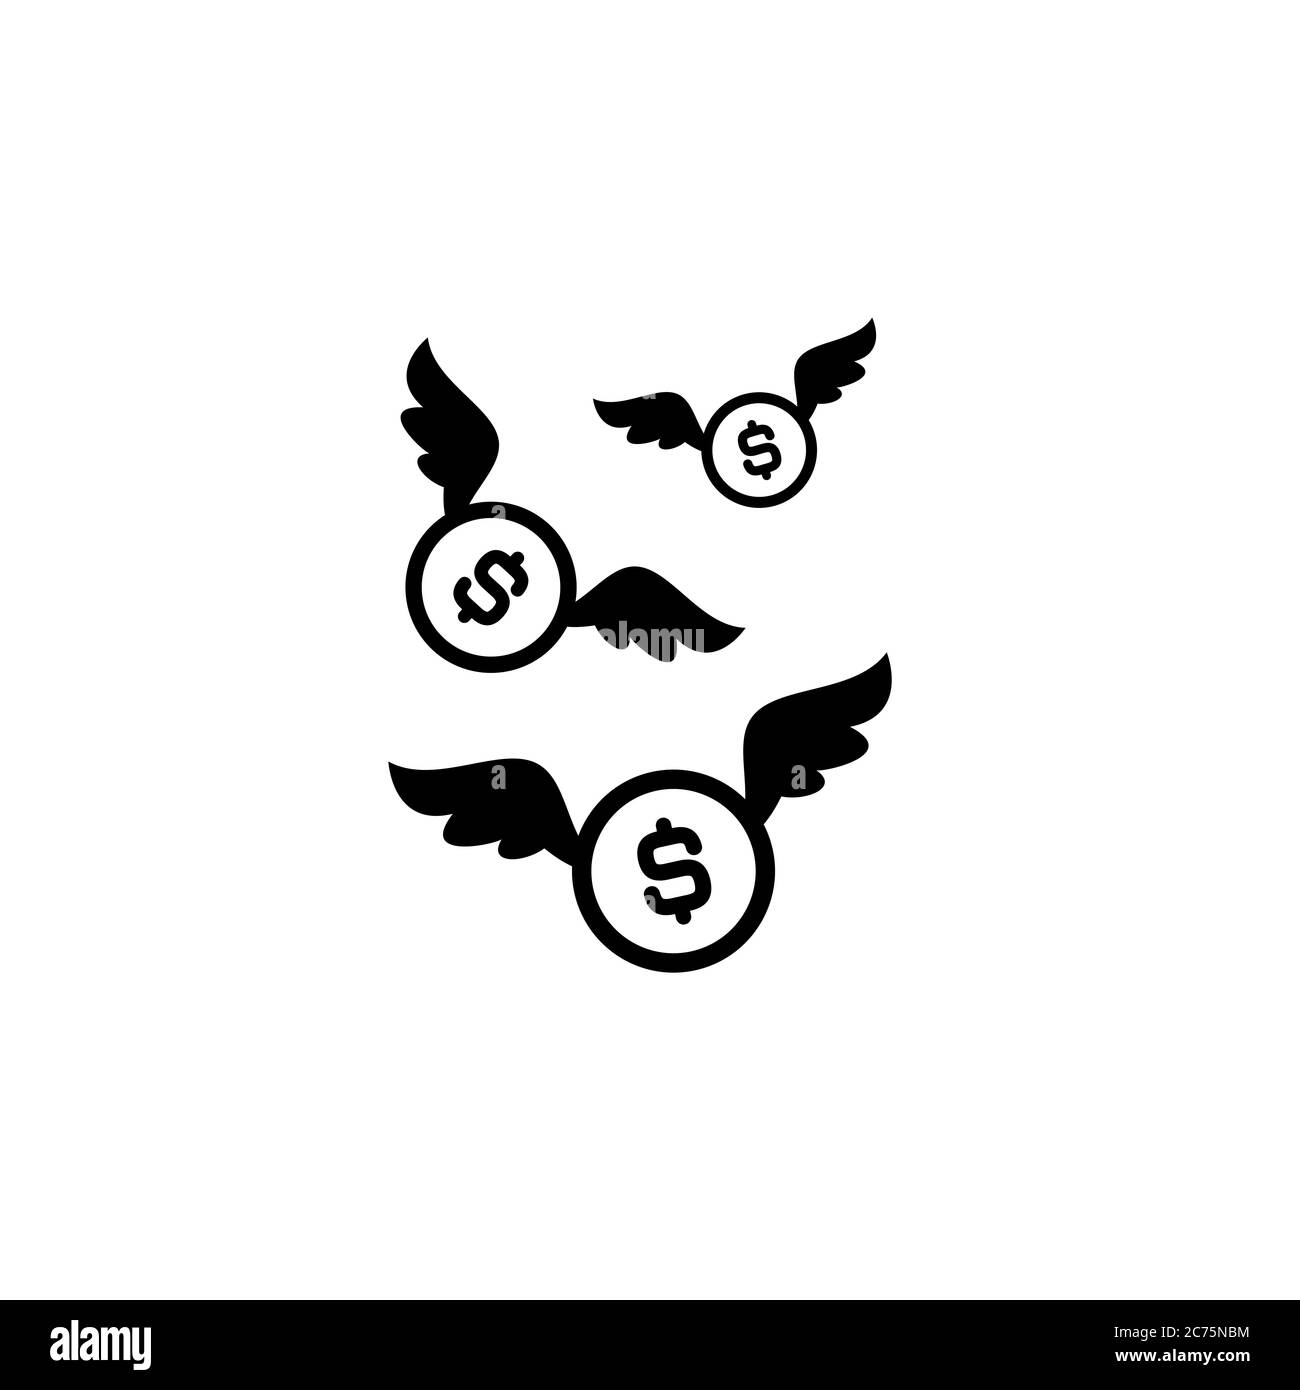 Black dollar coins with white wings. Flat white background. Flying money. Economy, finance, money pictogram. Wealth symbol. Vector illustration. Free, Stock Vector